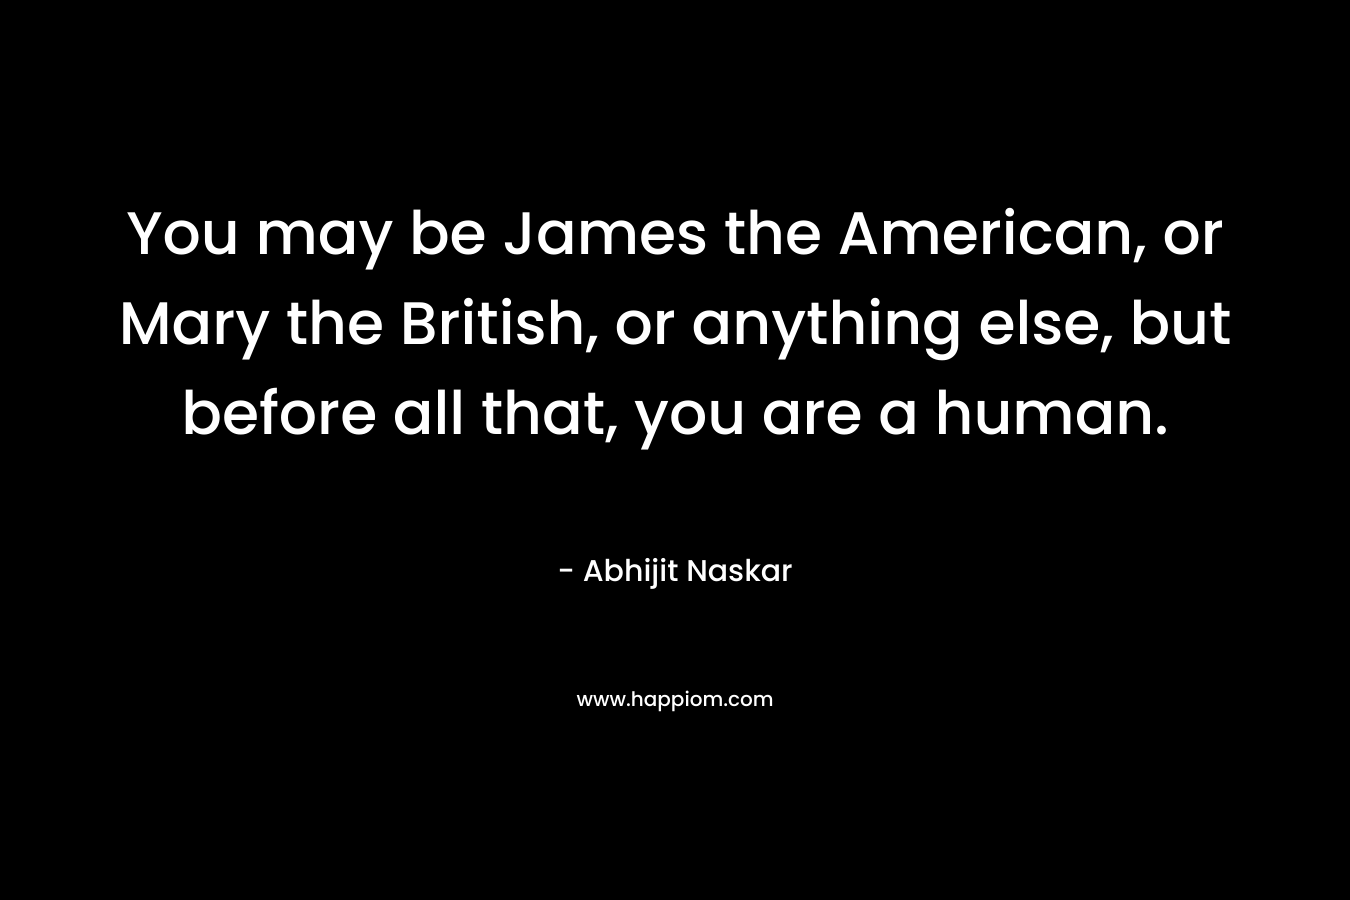 You may be James the American, or Mary the British, or anything else, but before all that, you are a human.